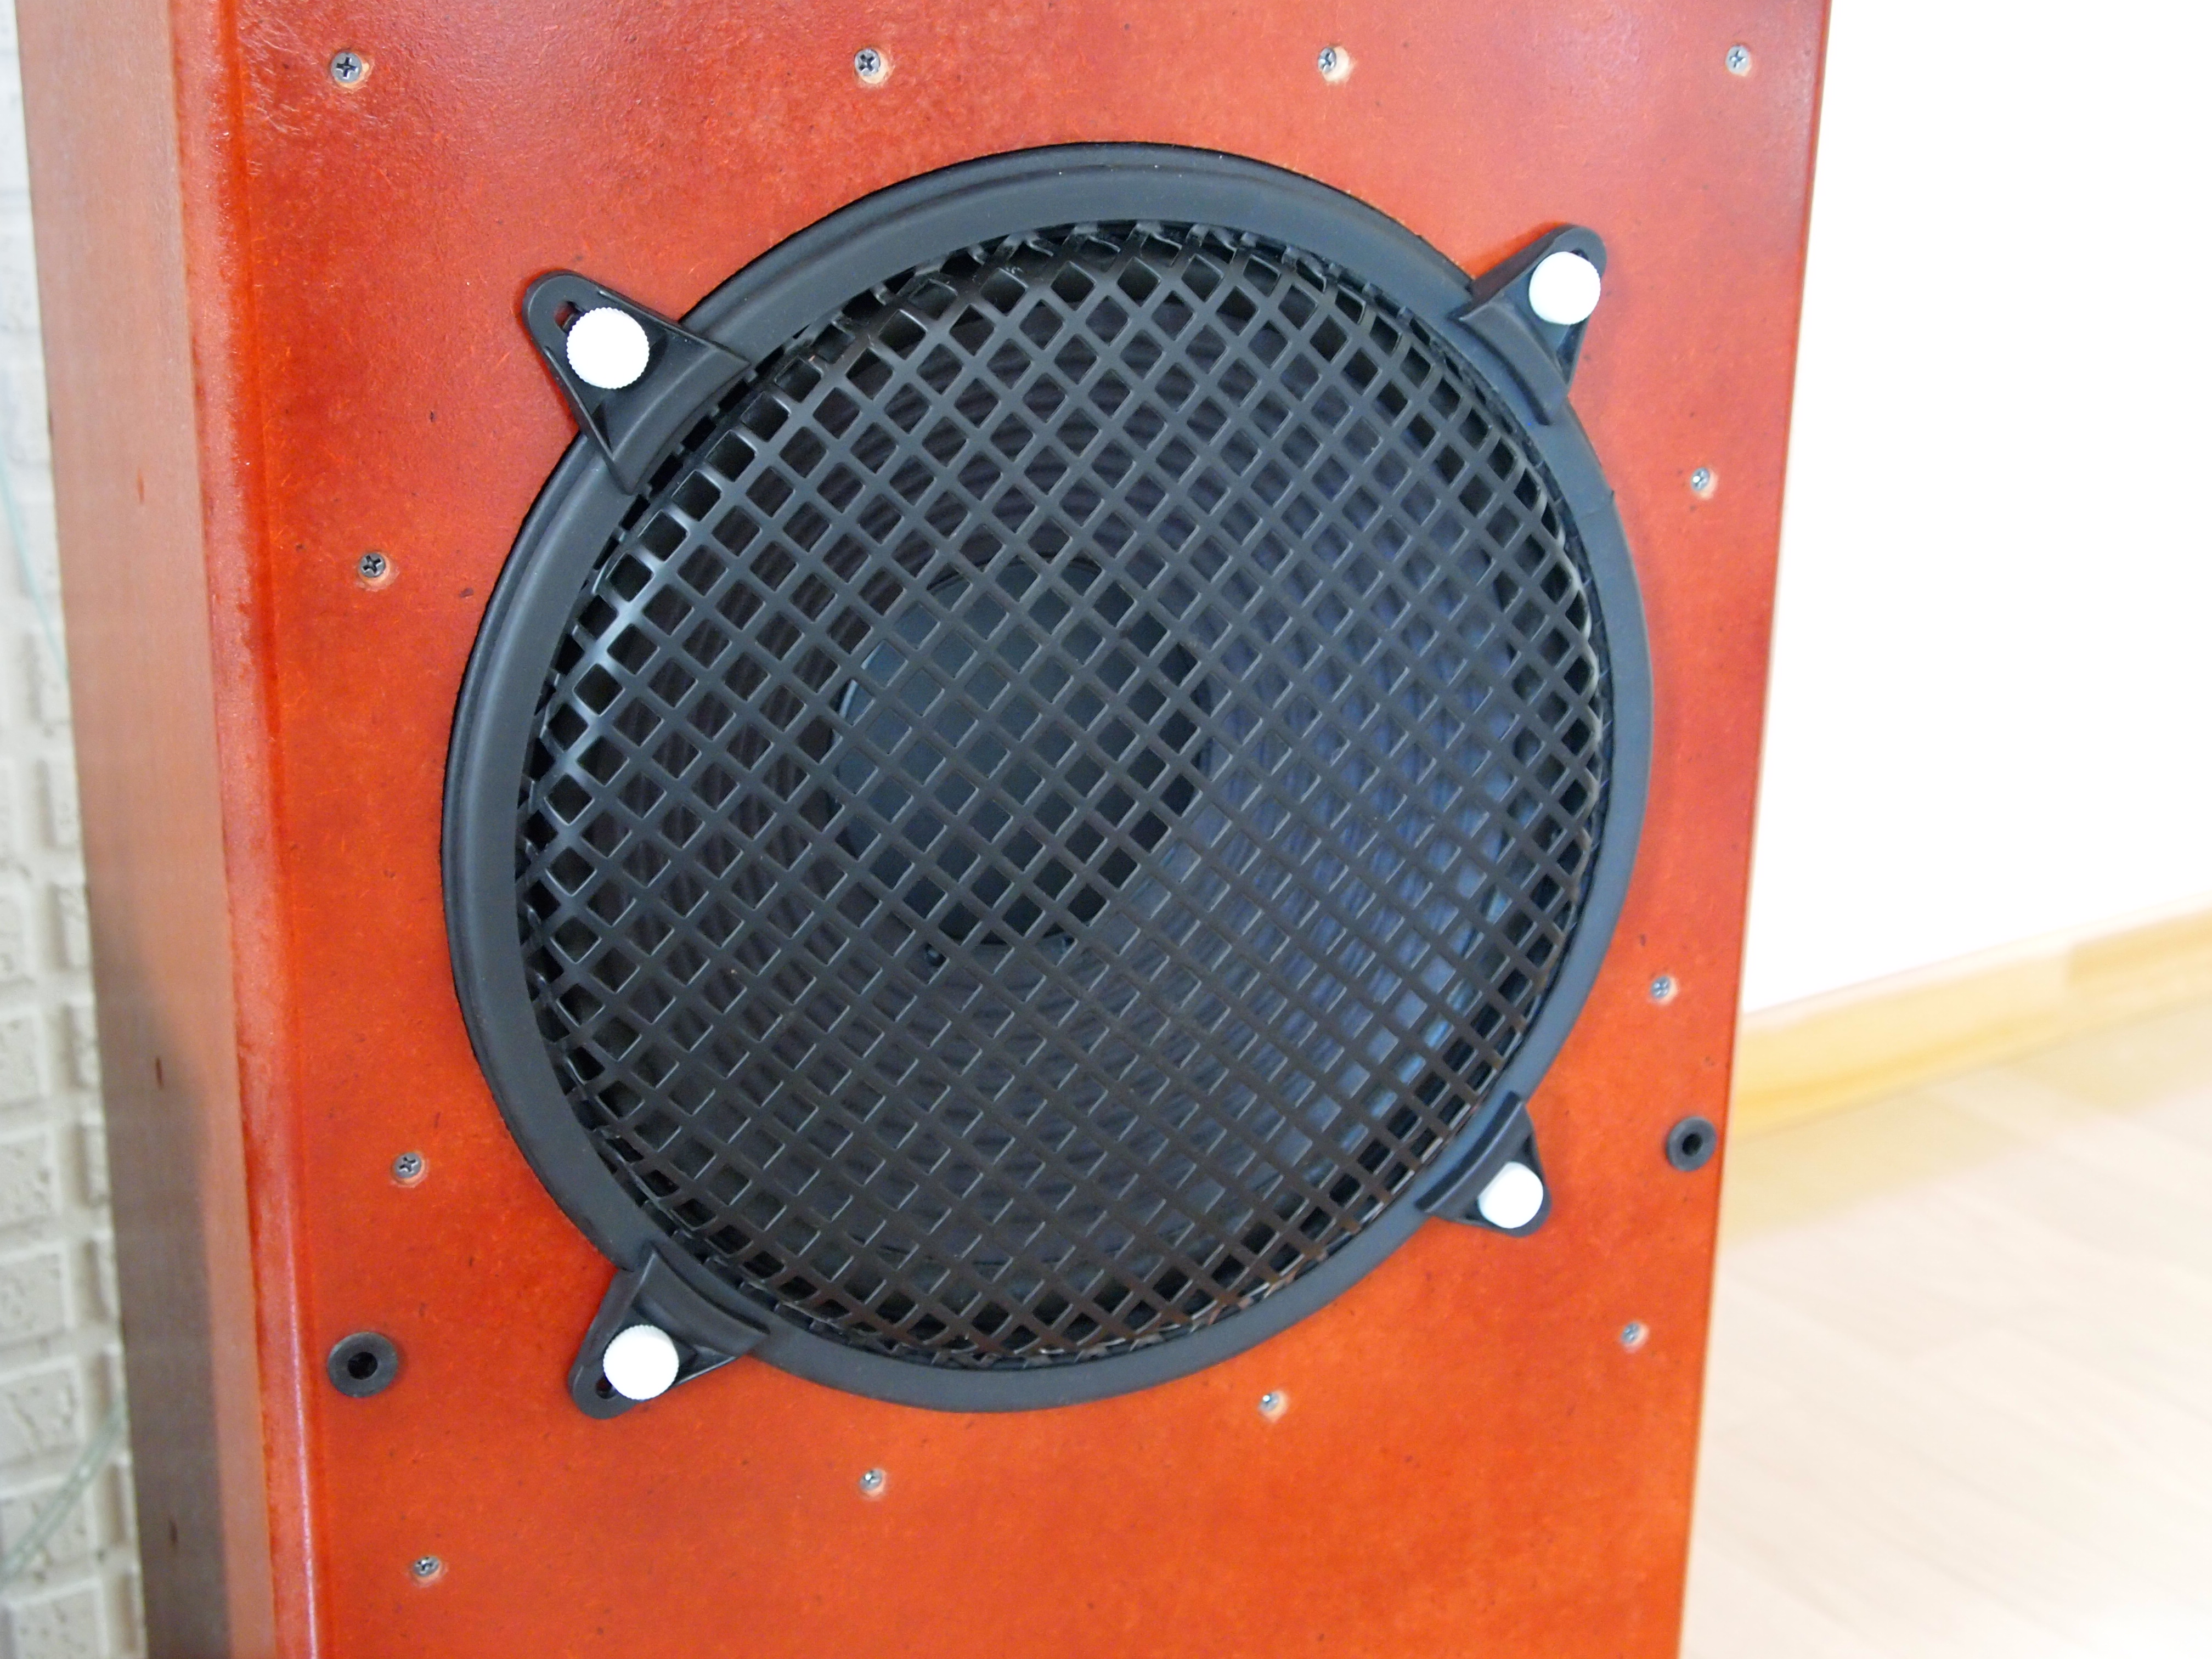 Completed woofer module with Fostex grille